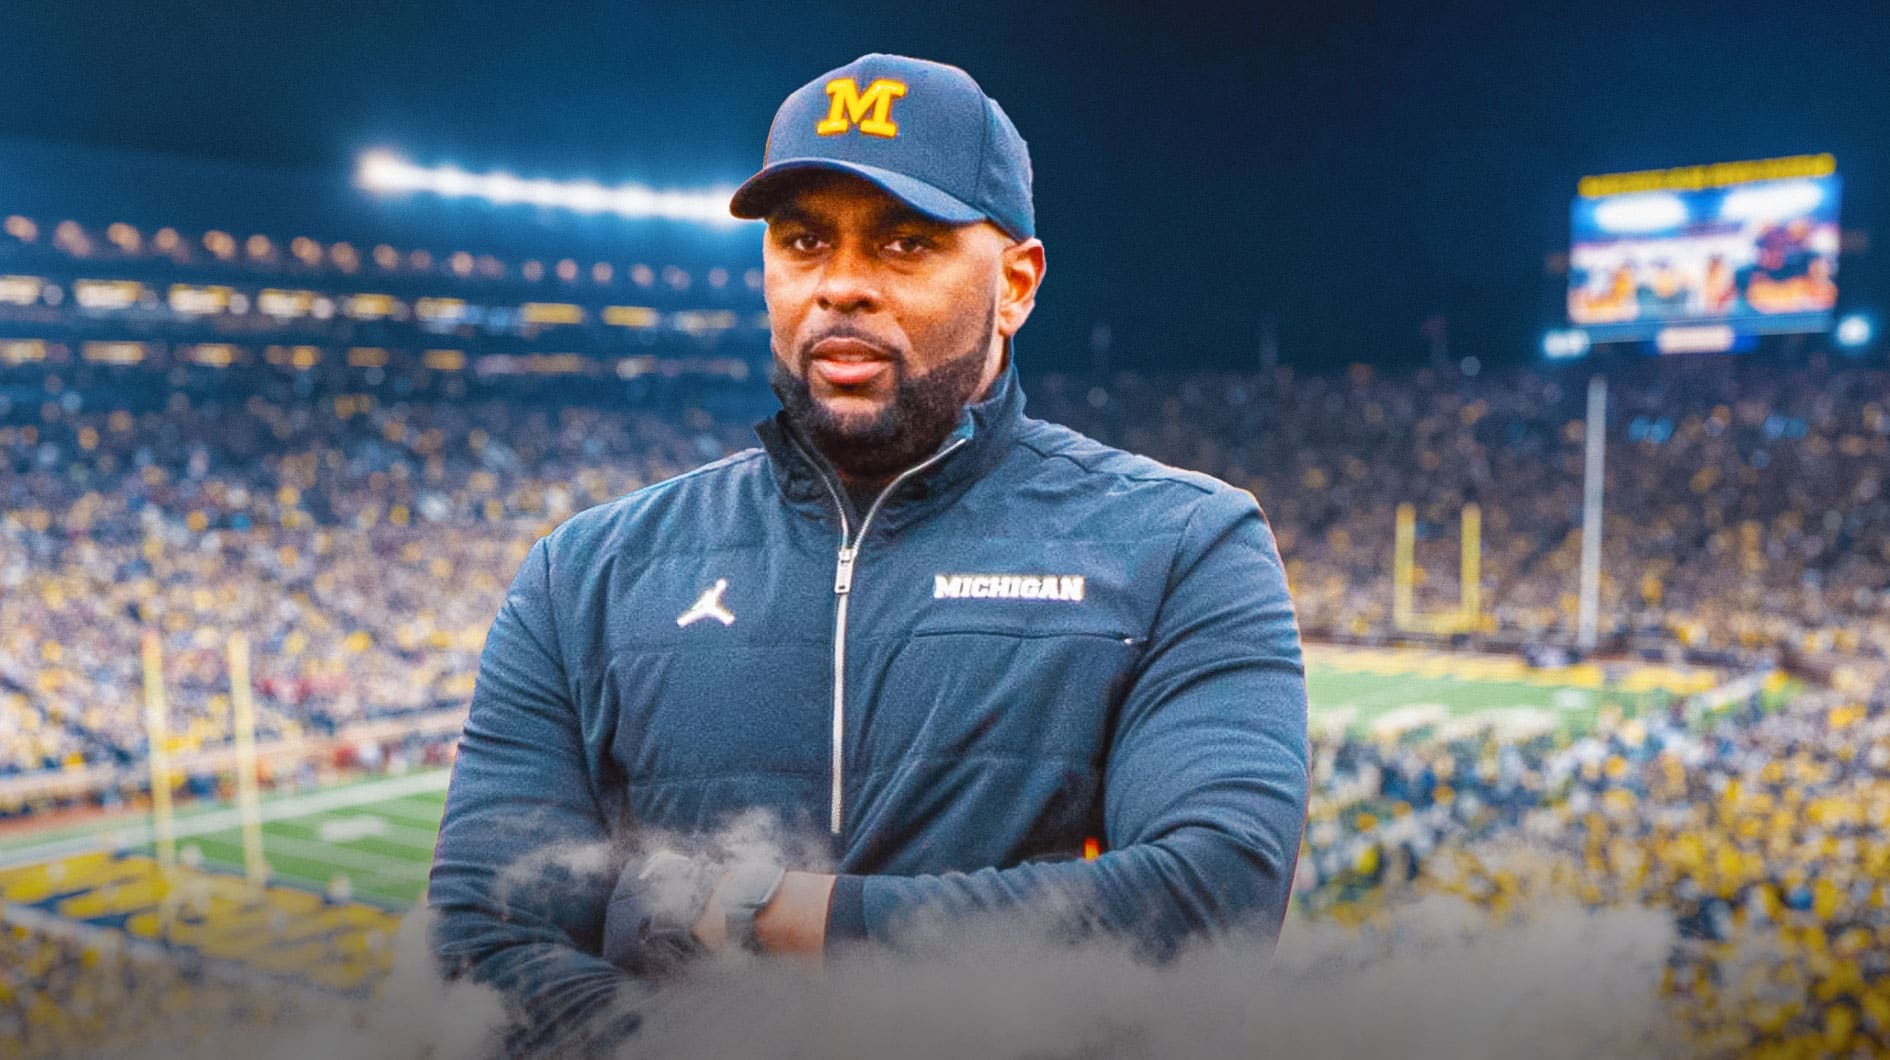 Michigan Football is one step closer to signing a 4-star elite TE